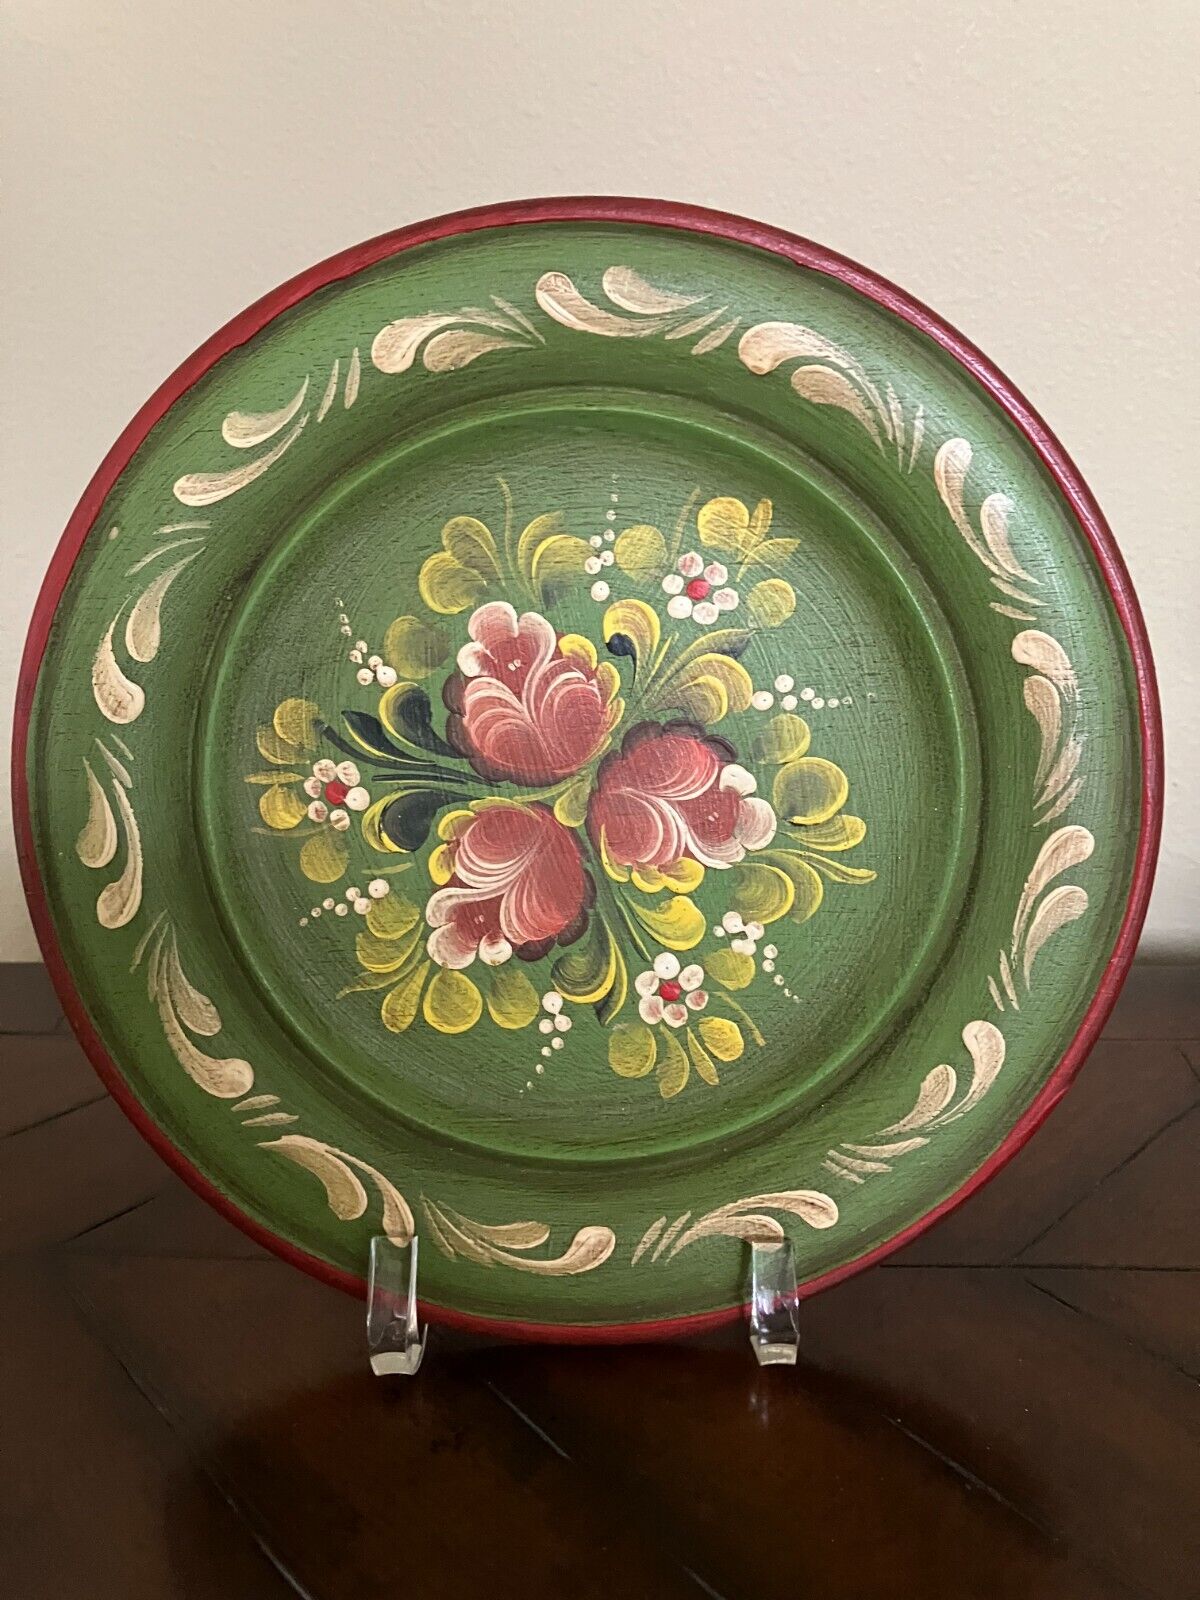 Vintage Tole Painted Handmade Floral Plate Green Wall Decor